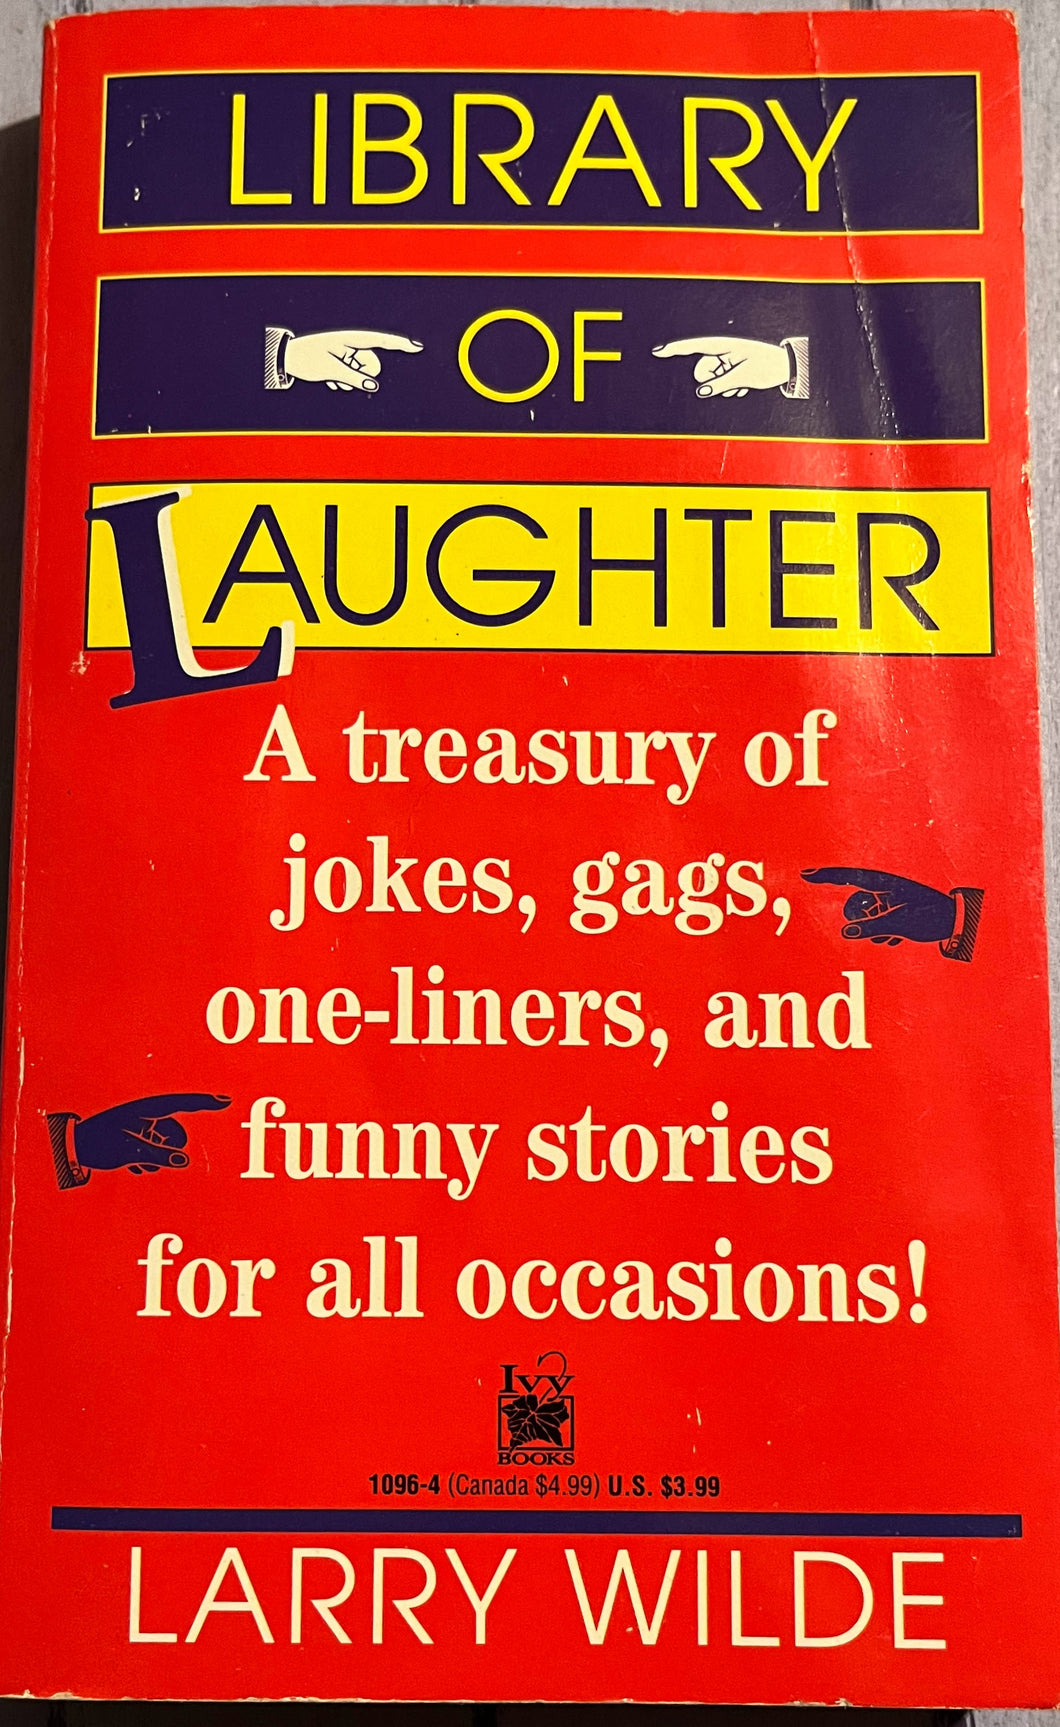 The Larry Wilde Library of Laughter